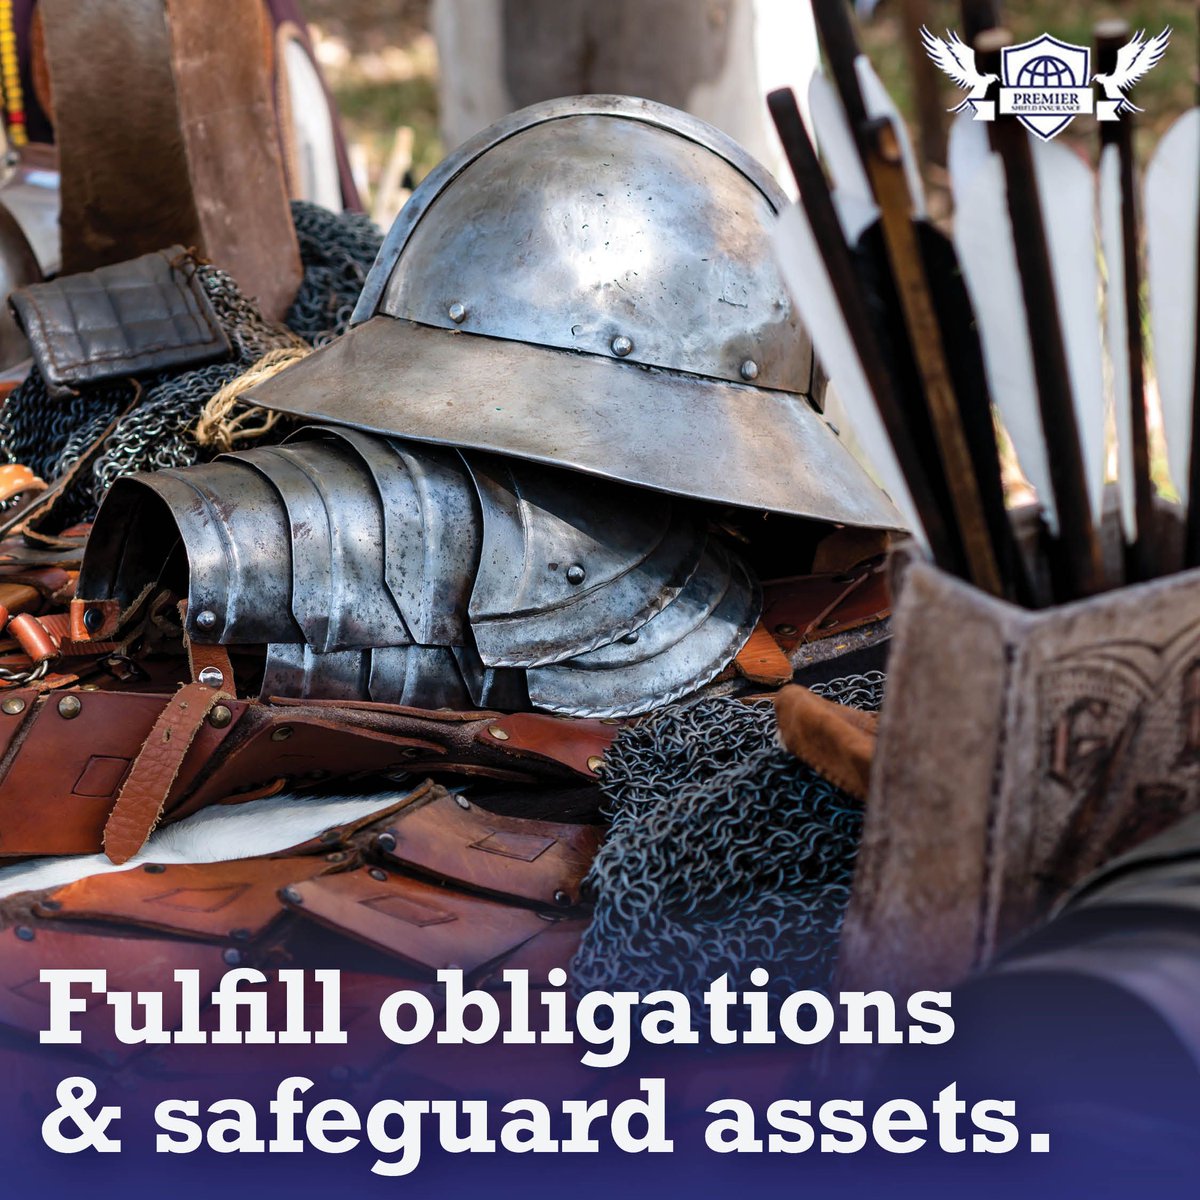 Thou hast entered into contracts, binding and sworn. Fulfill thy obligations and safeguard thy realm with Premier Shield's comprehensive insurance. 🛡️

Discover the strength of contractual protection today at premiershieldinsurance.net/business-insur… 

#businessvendors #premiershield